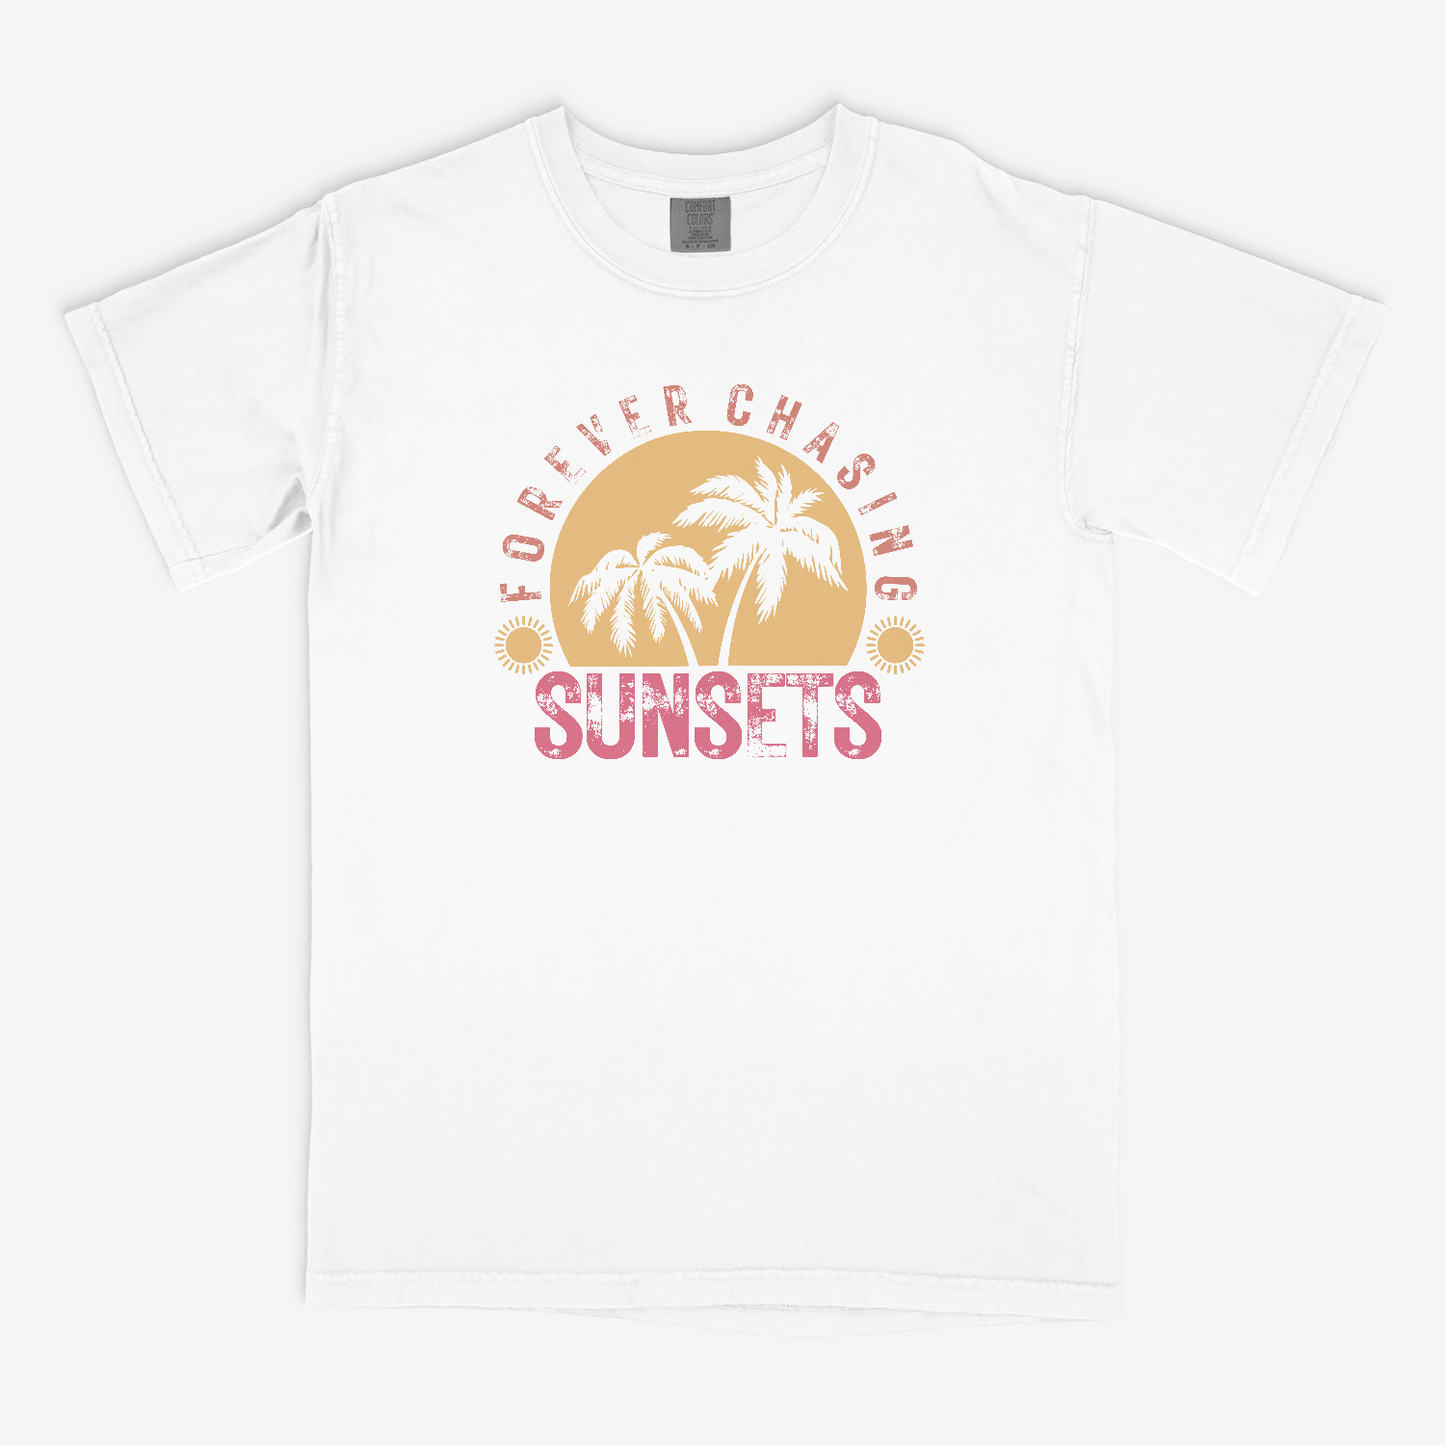 Forever Chasing Sunsets - Comfort Colors